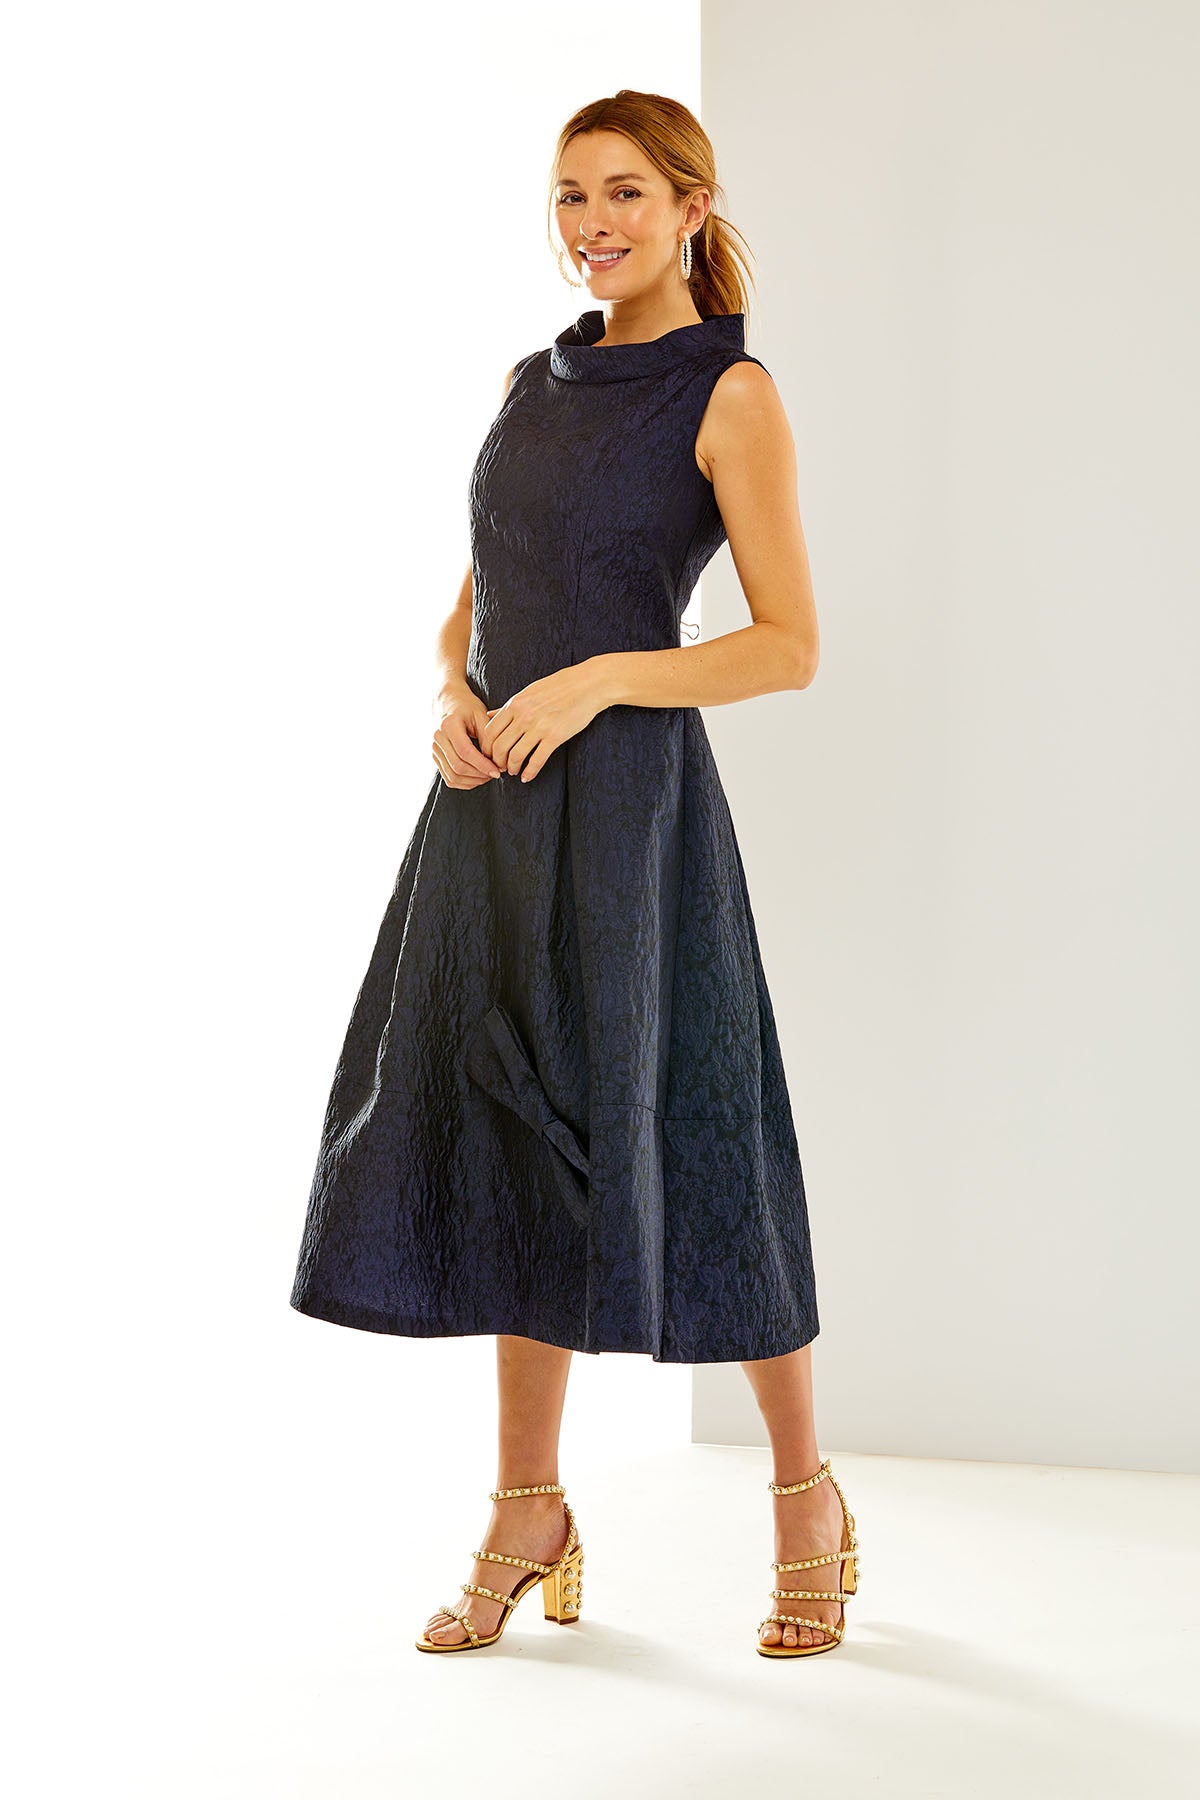 The Claire Dress in Navy Jacquard